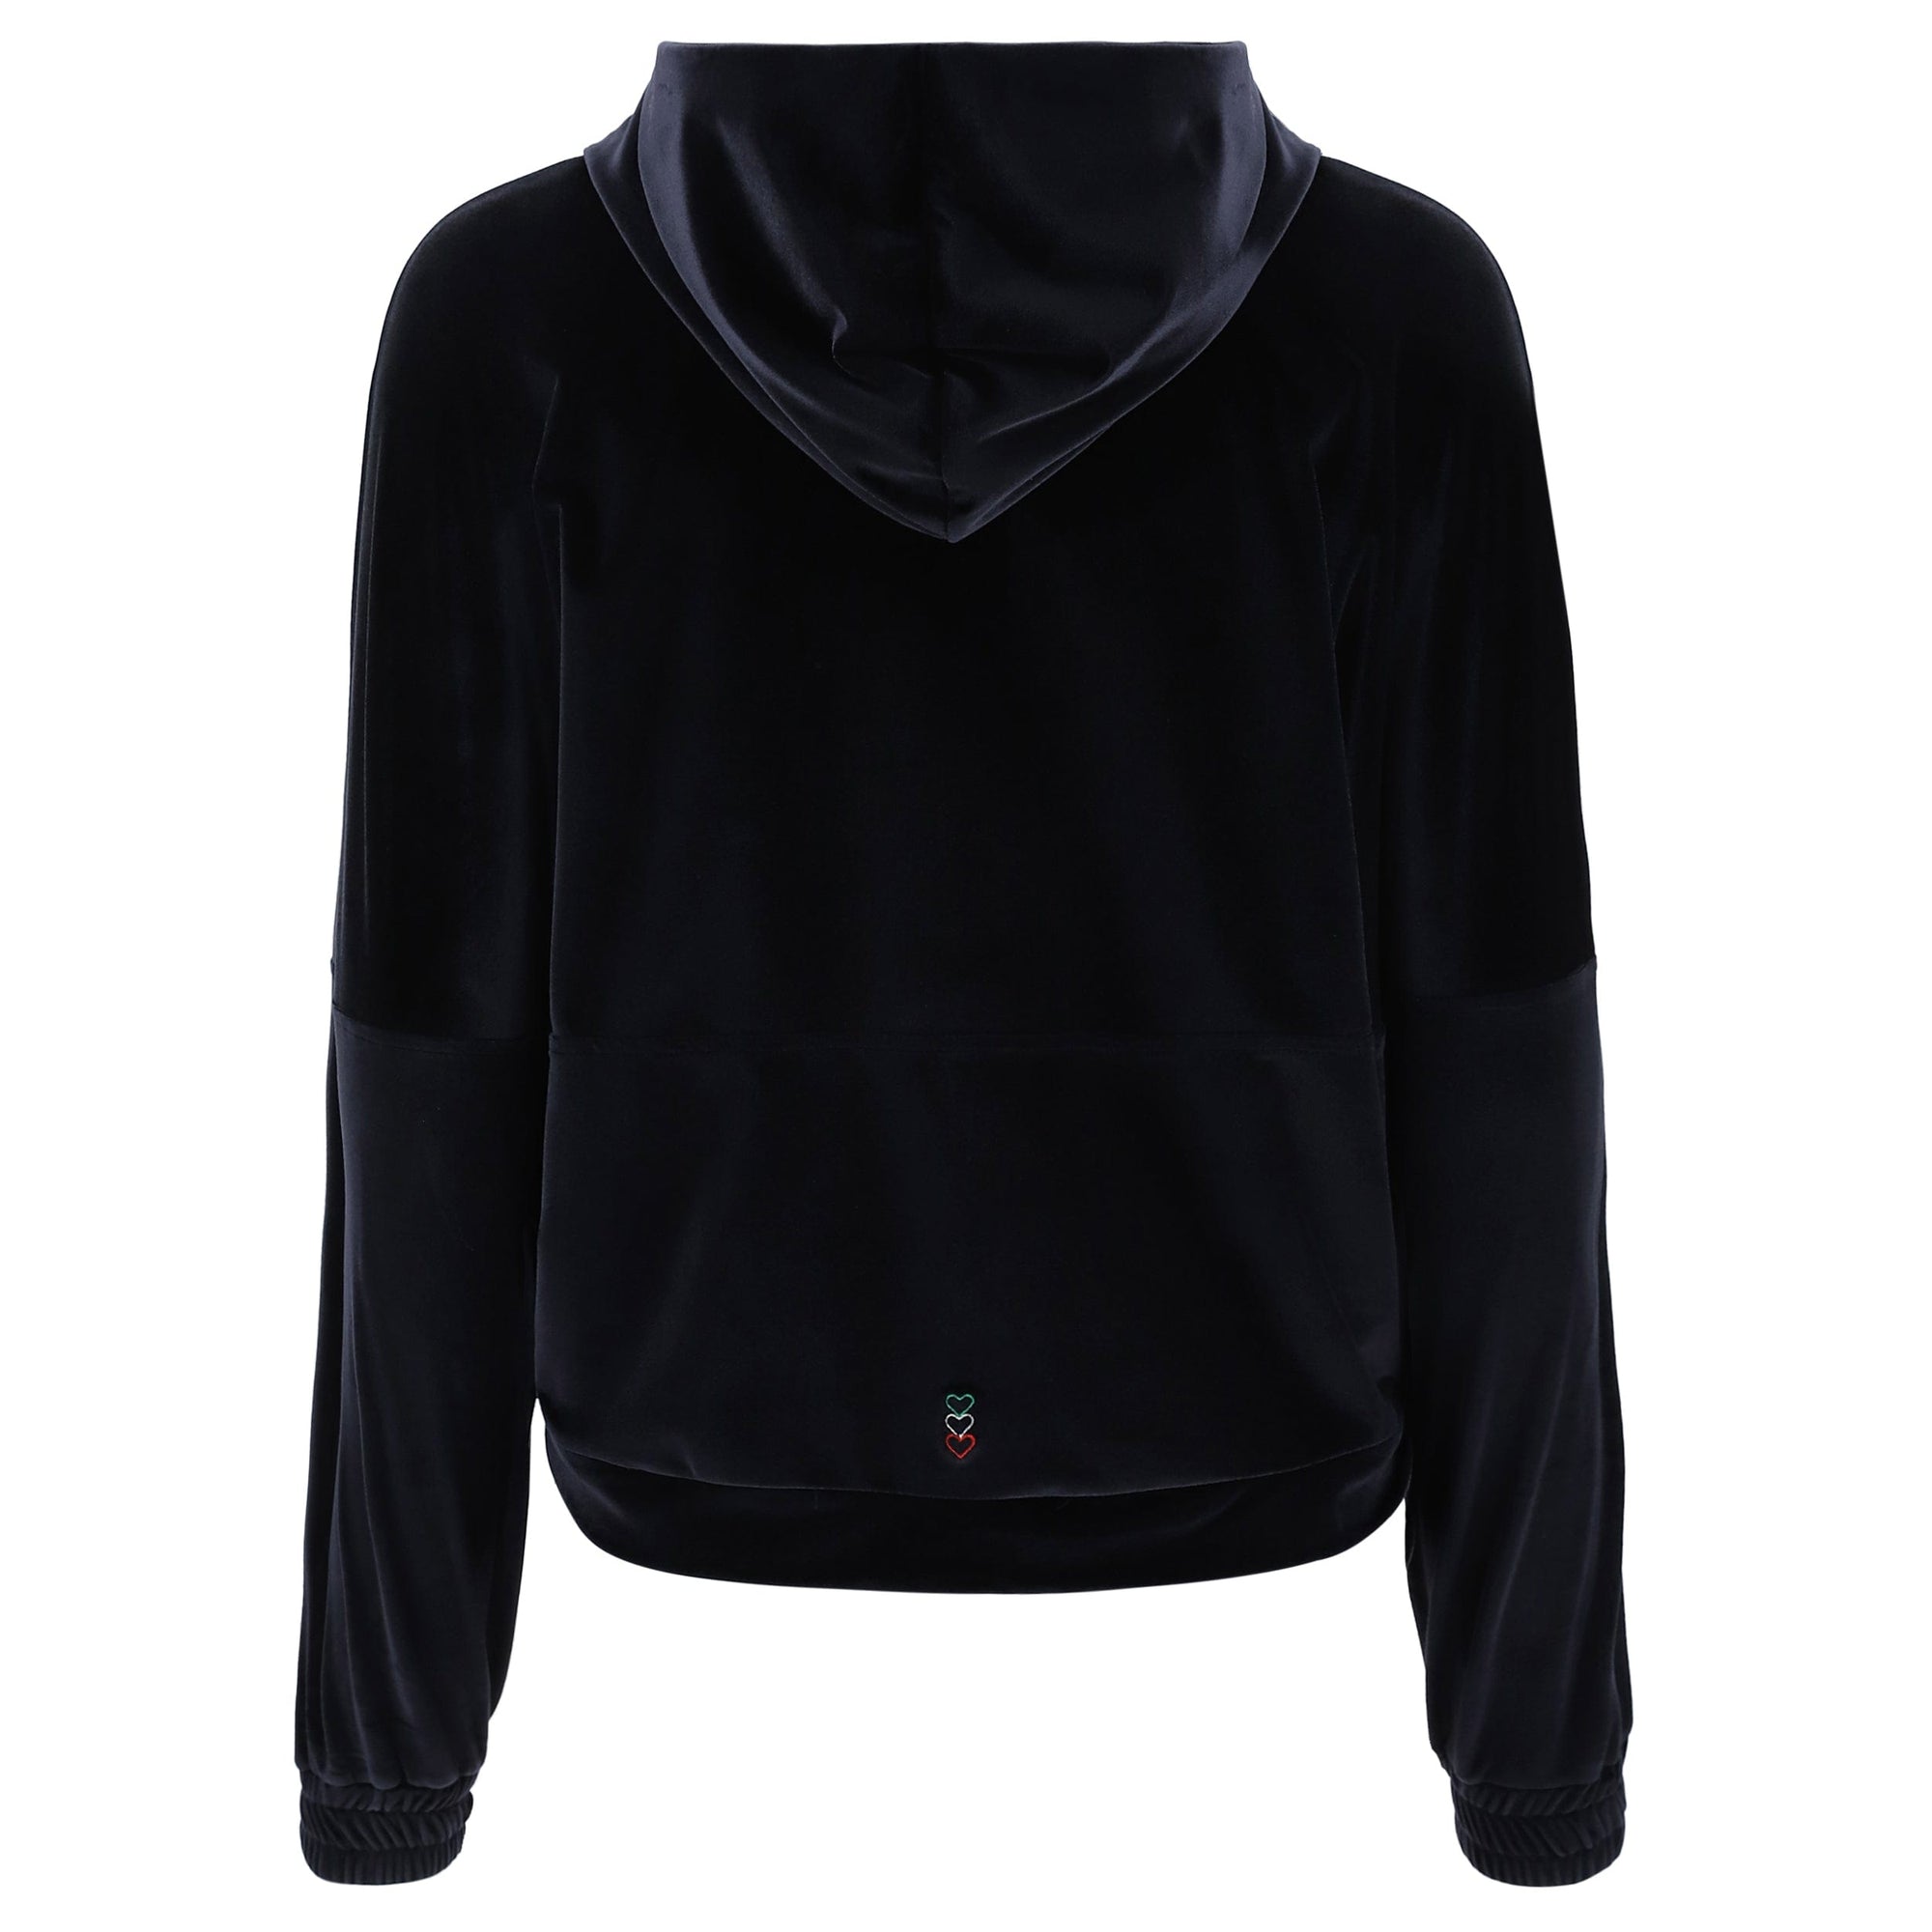 Soft chenille sweatshirt - 100% Made in Italy 2